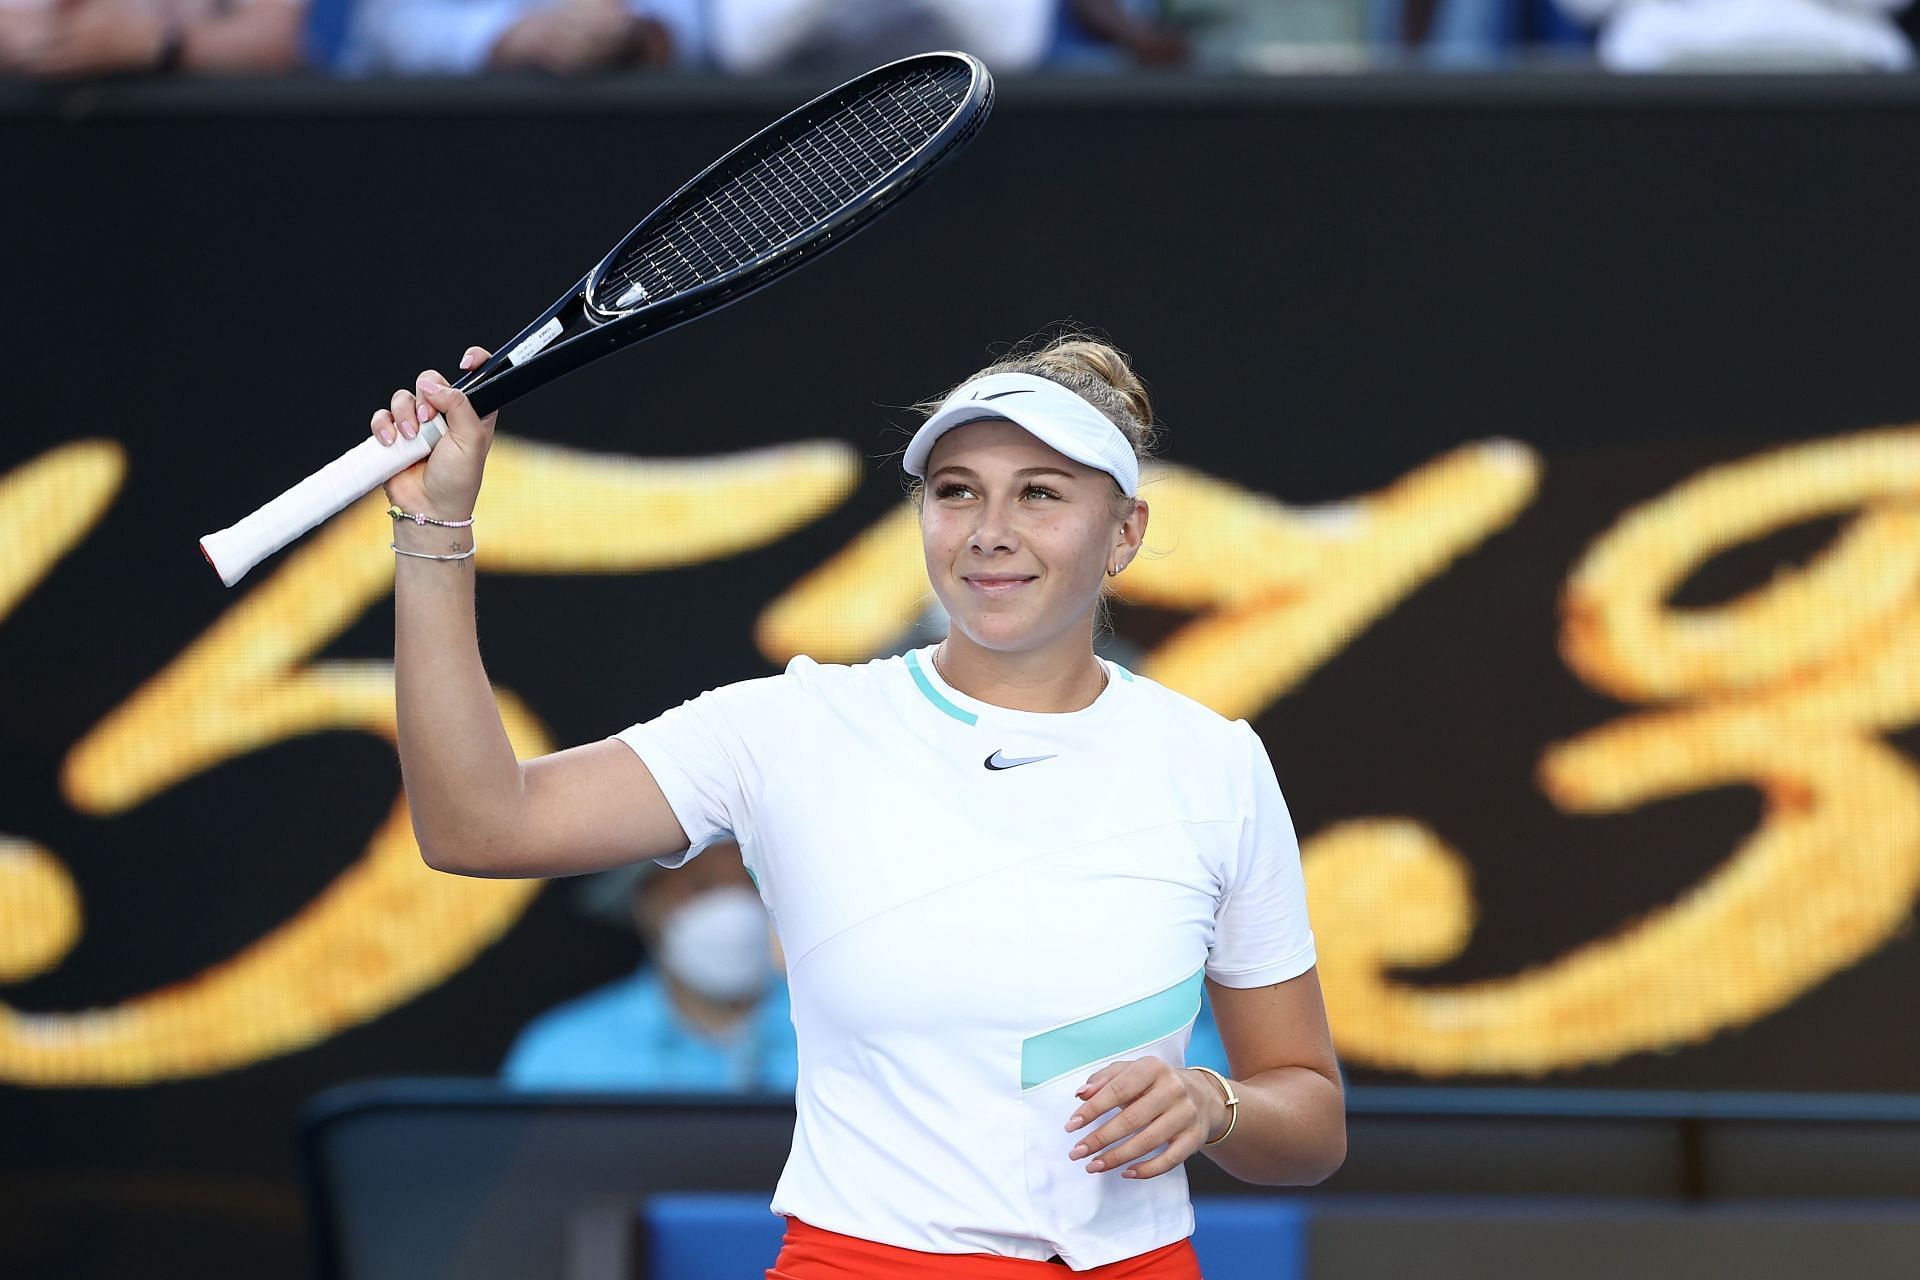 Amanda Anisimova acknowledges the crowd after her second-round win at 2022 Australian Open